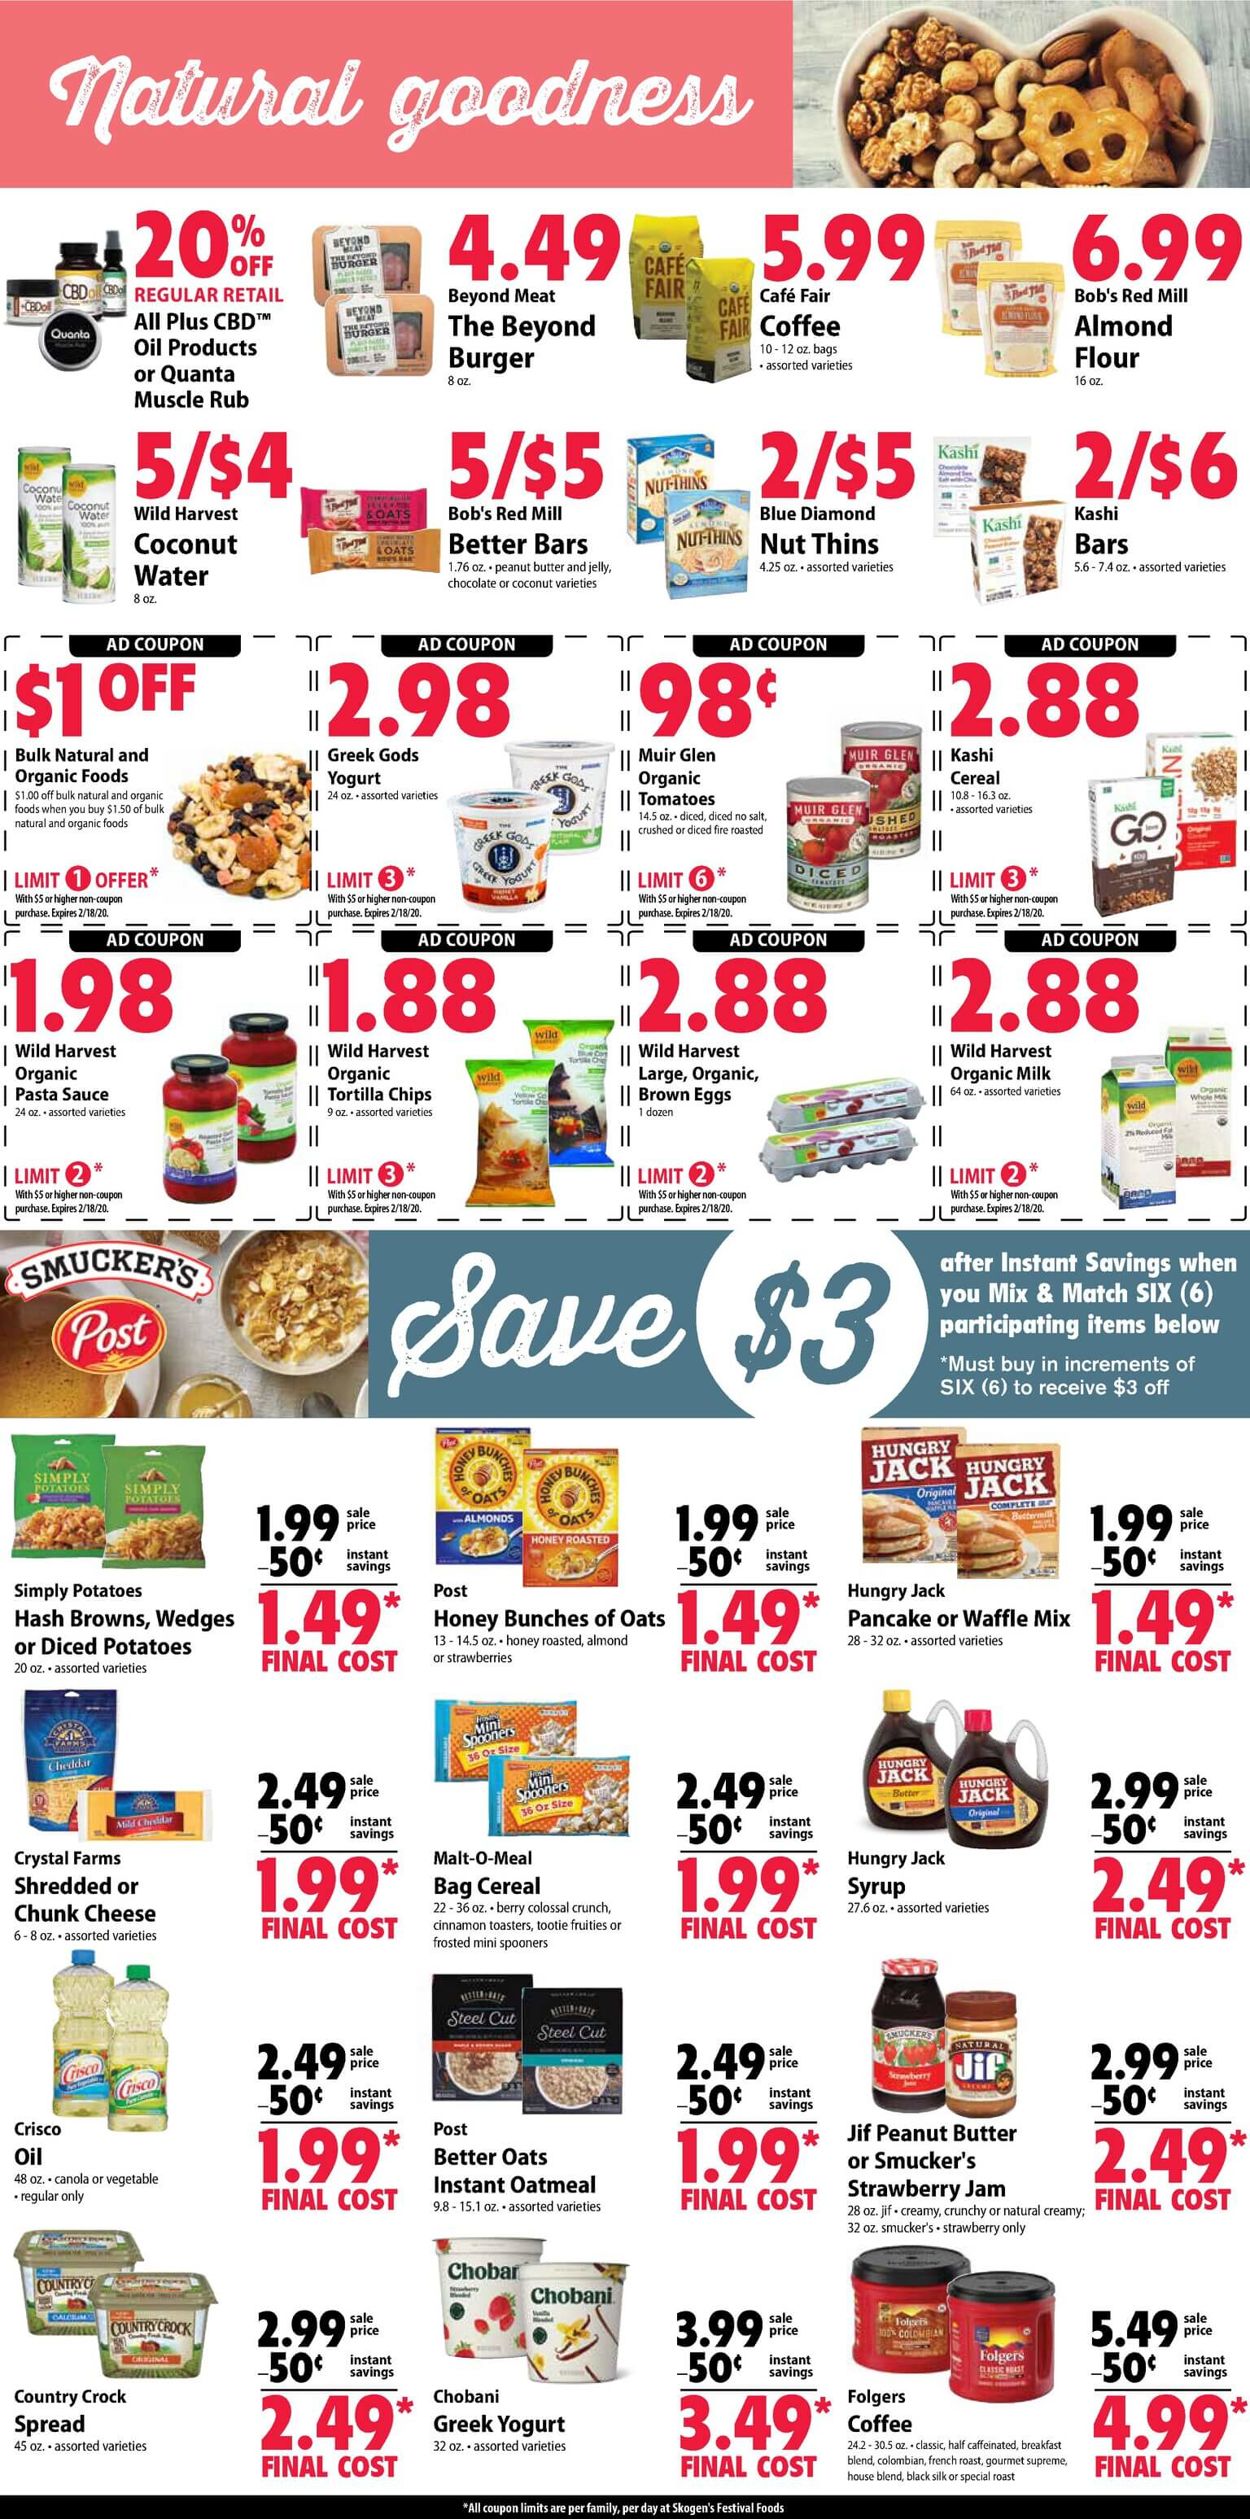 Festival Foods Current weekly ad 02/12 02/18/2020 [8]